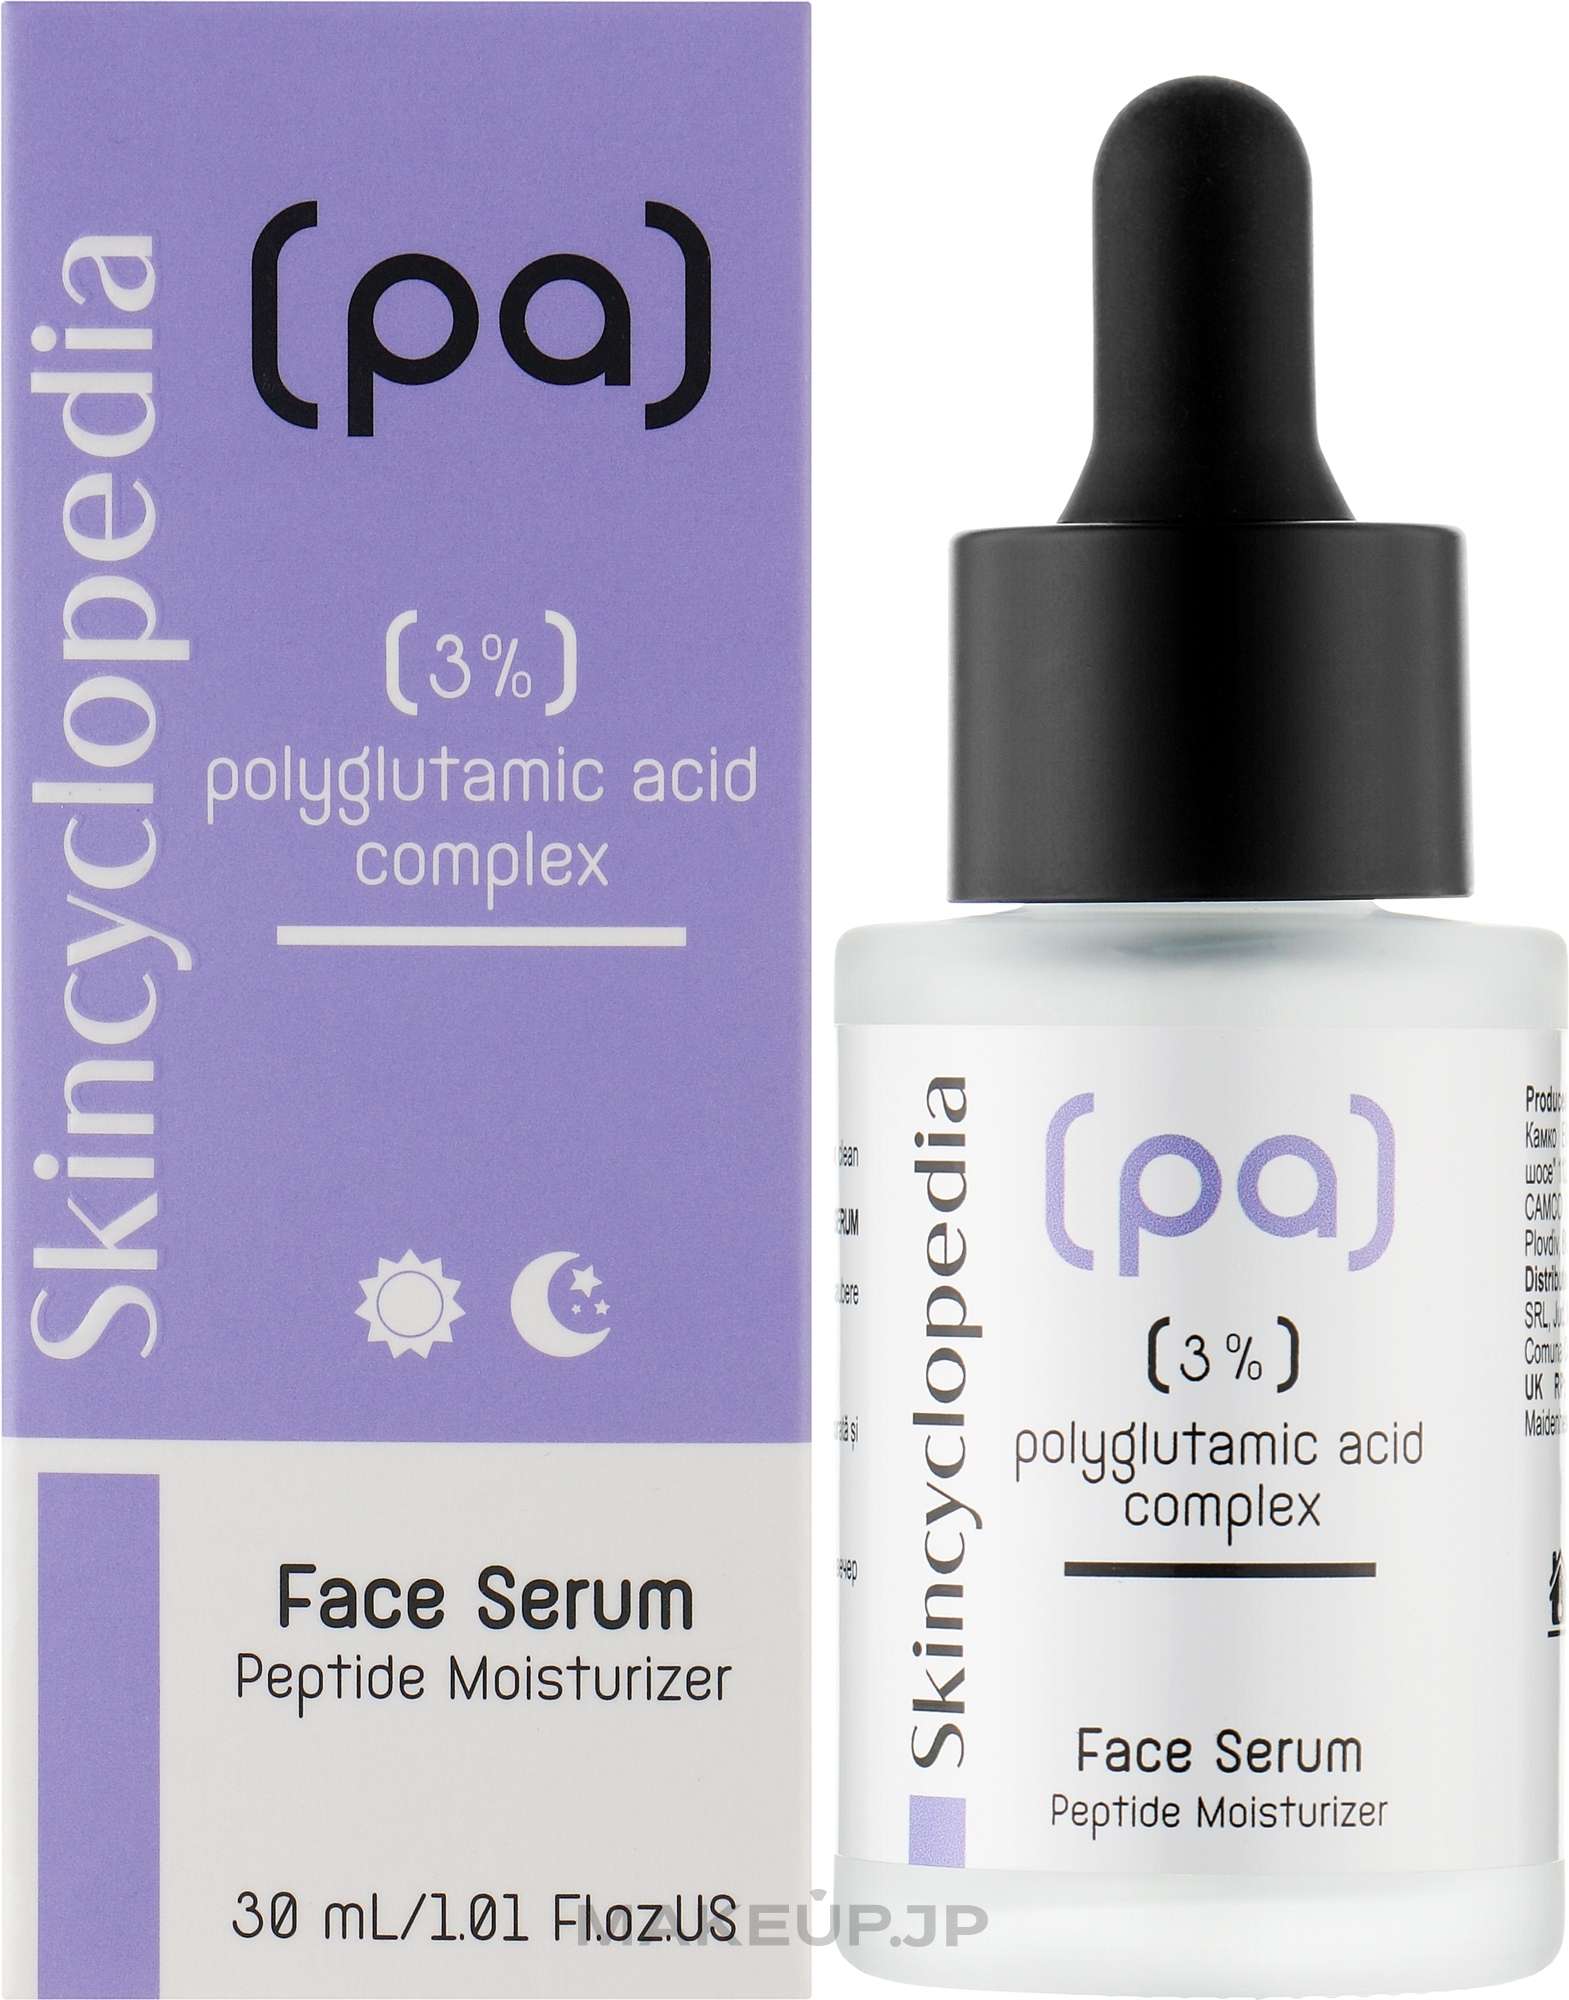 Moisturizing Face Serum with Polyglutamic Acid - Skincyclopedia Concentrated Face Serum With 3% Polyglutamic Acid Complex — photo 30 ml